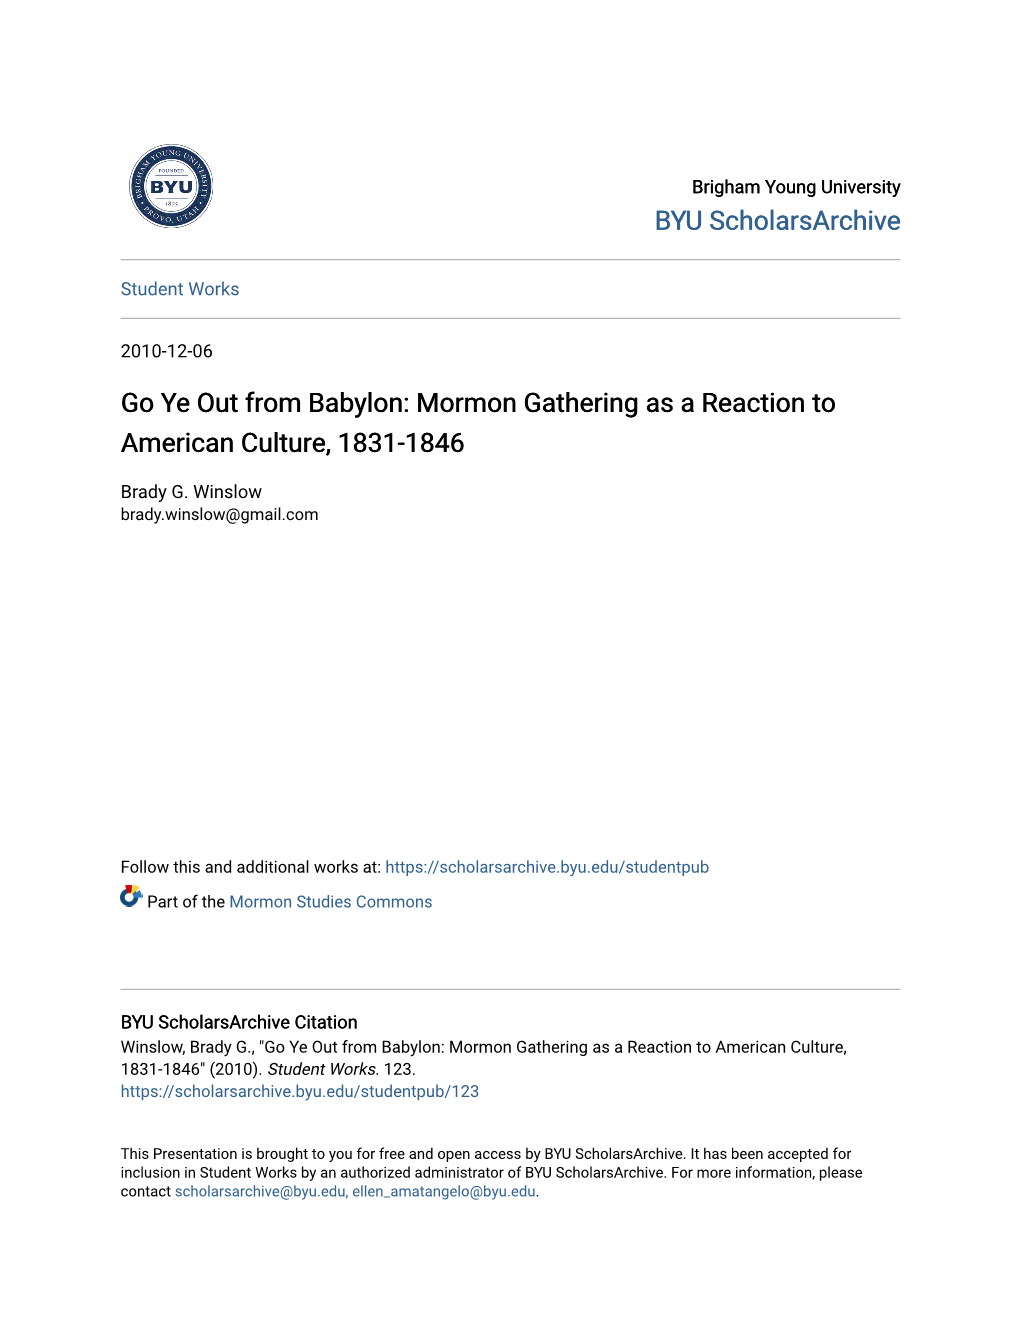 Go Ye out from Babylon: Mormon Gathering As a Reaction to American Culture, 1831-1846